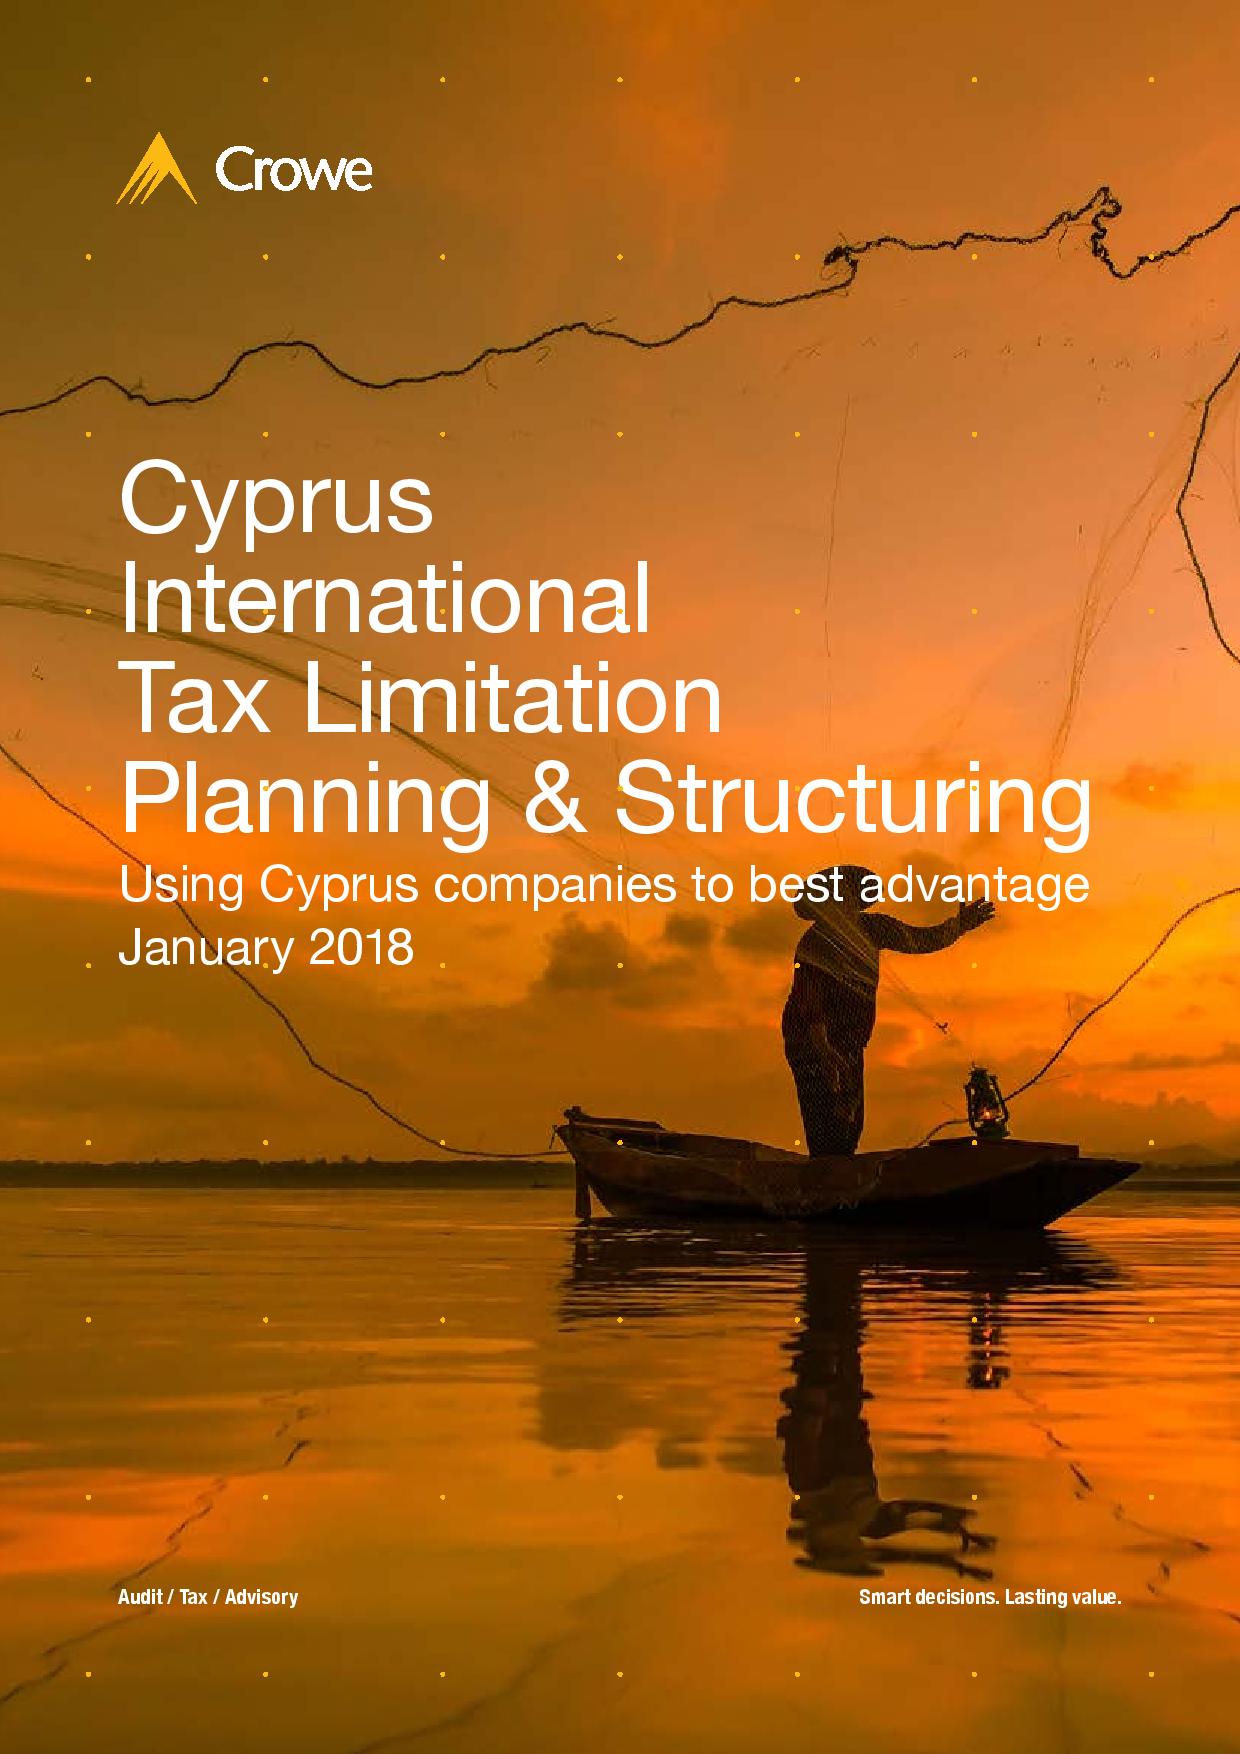 Crowe Cyprus: International Tax Limitation Planning and Structuring